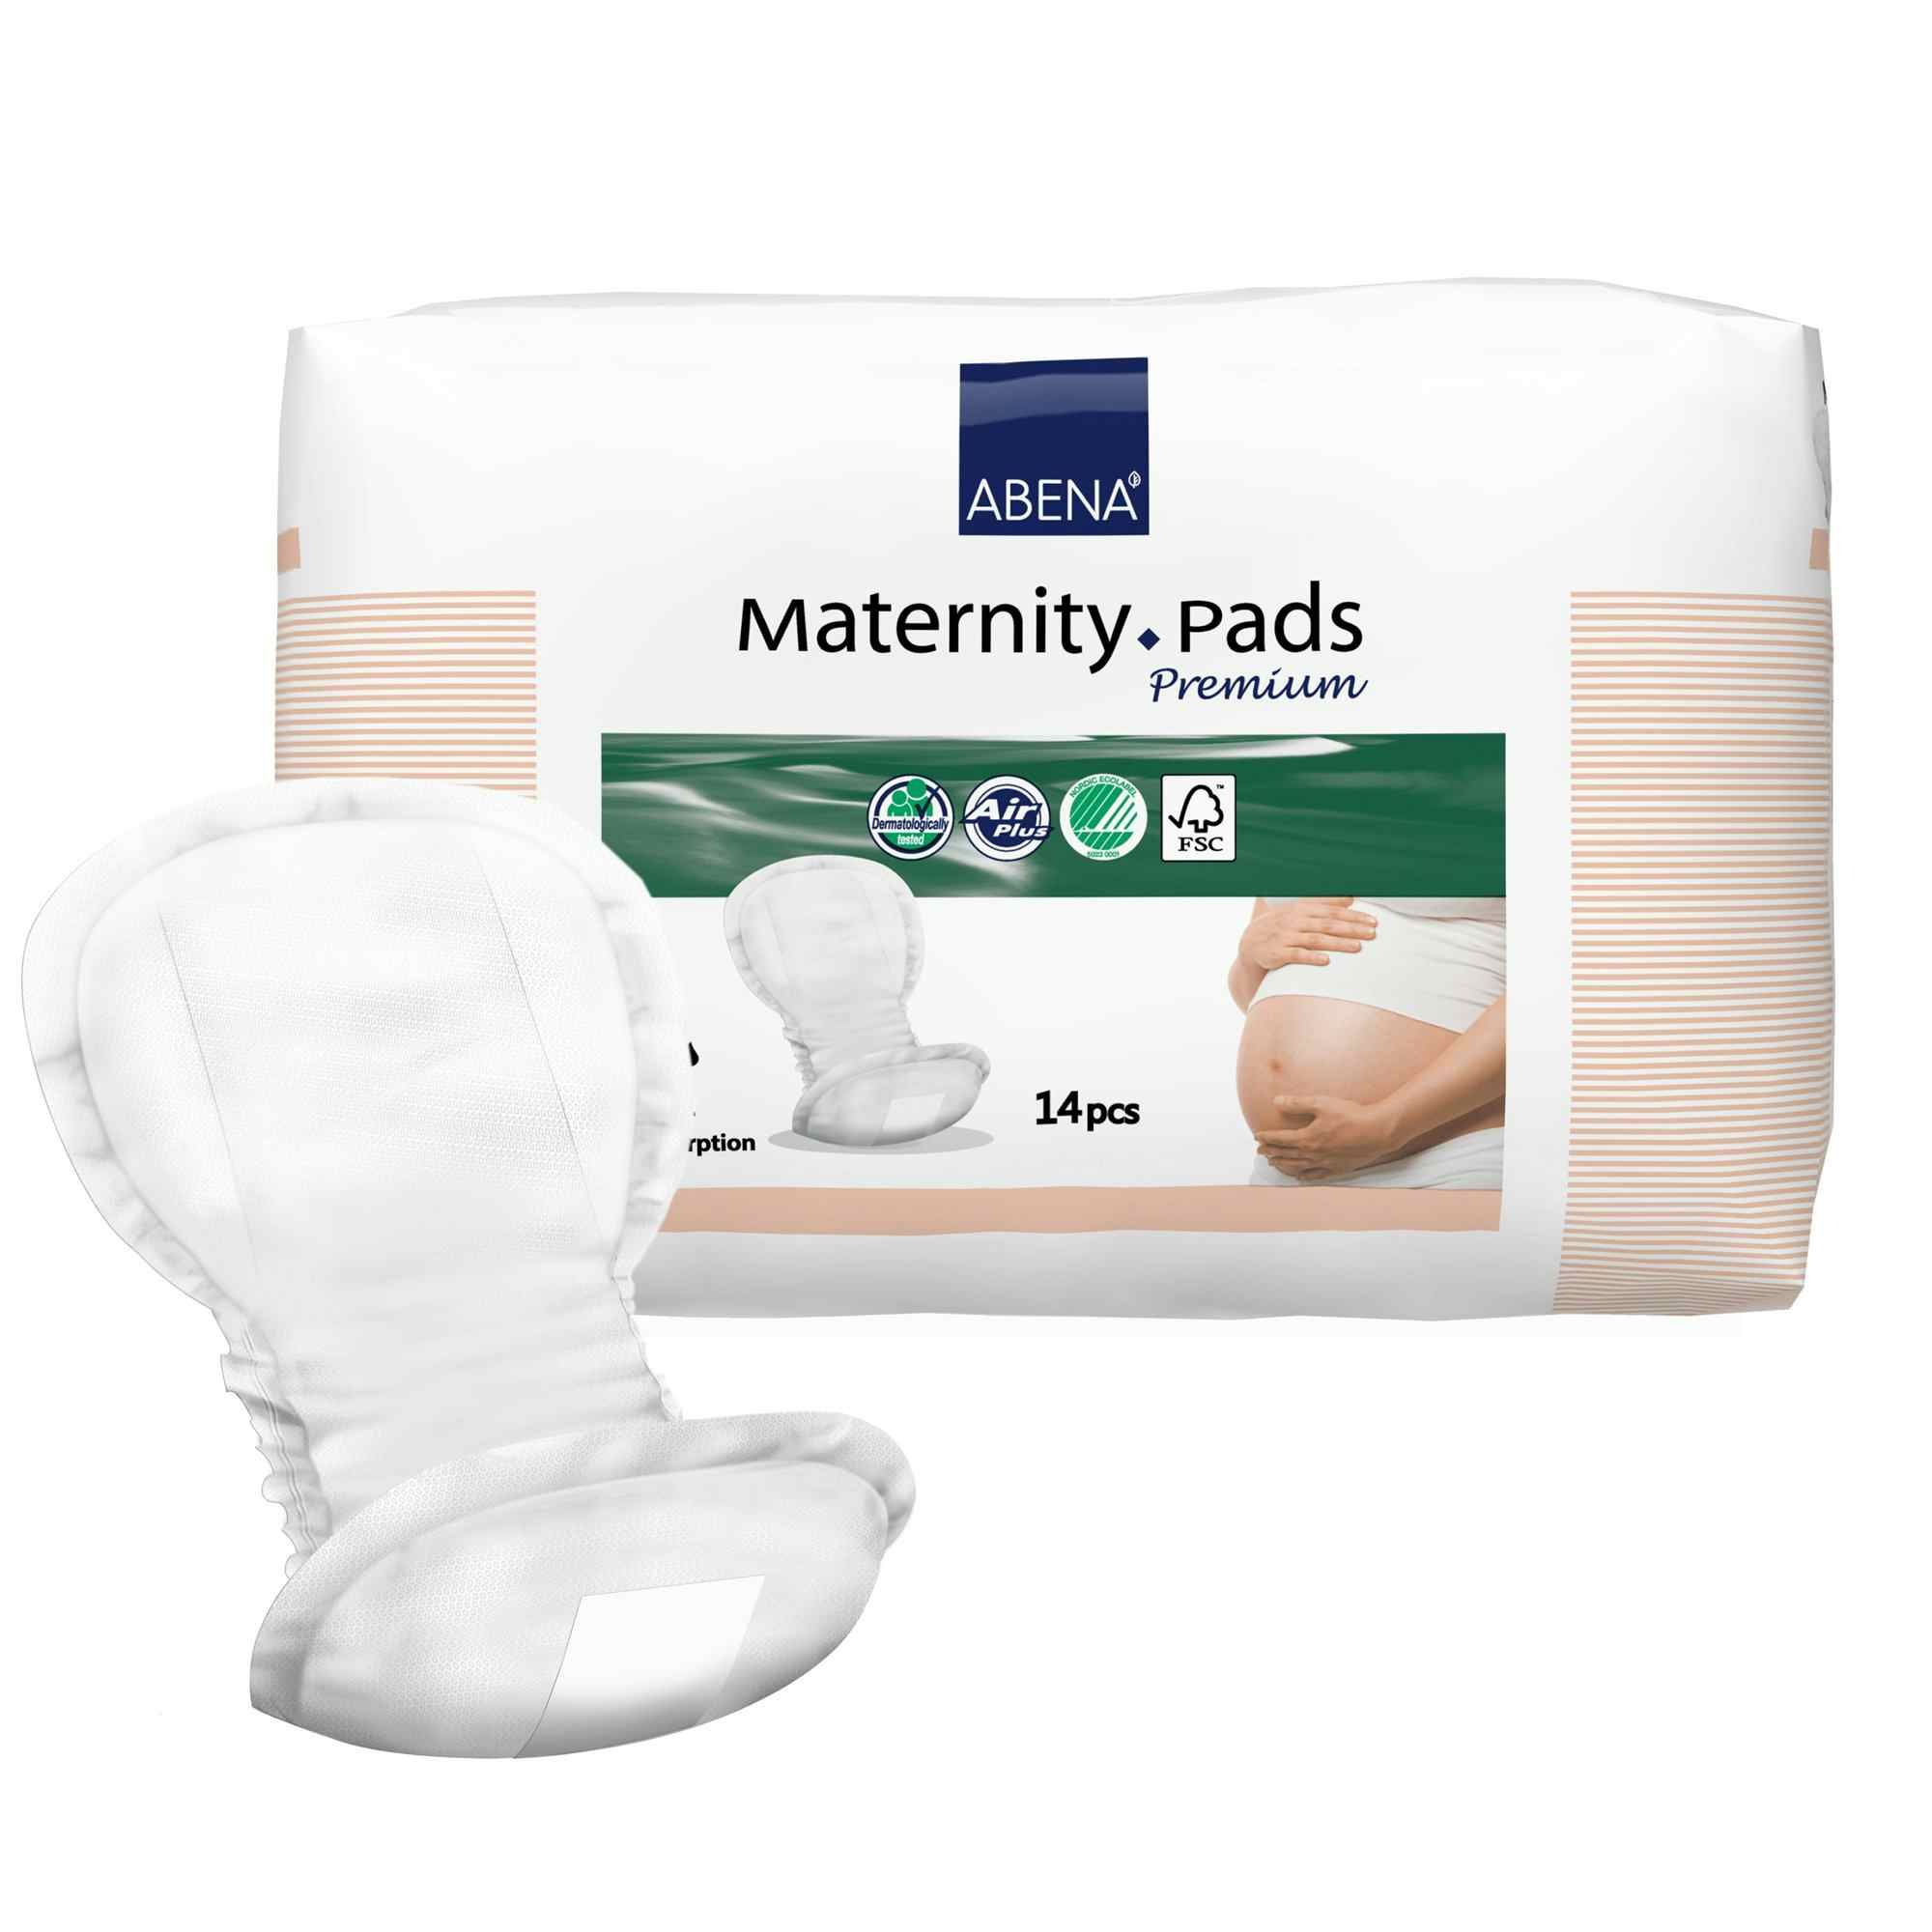 Abena Maternity Pads Premium Moderate Absorbency, 1000016571, Bag of 14